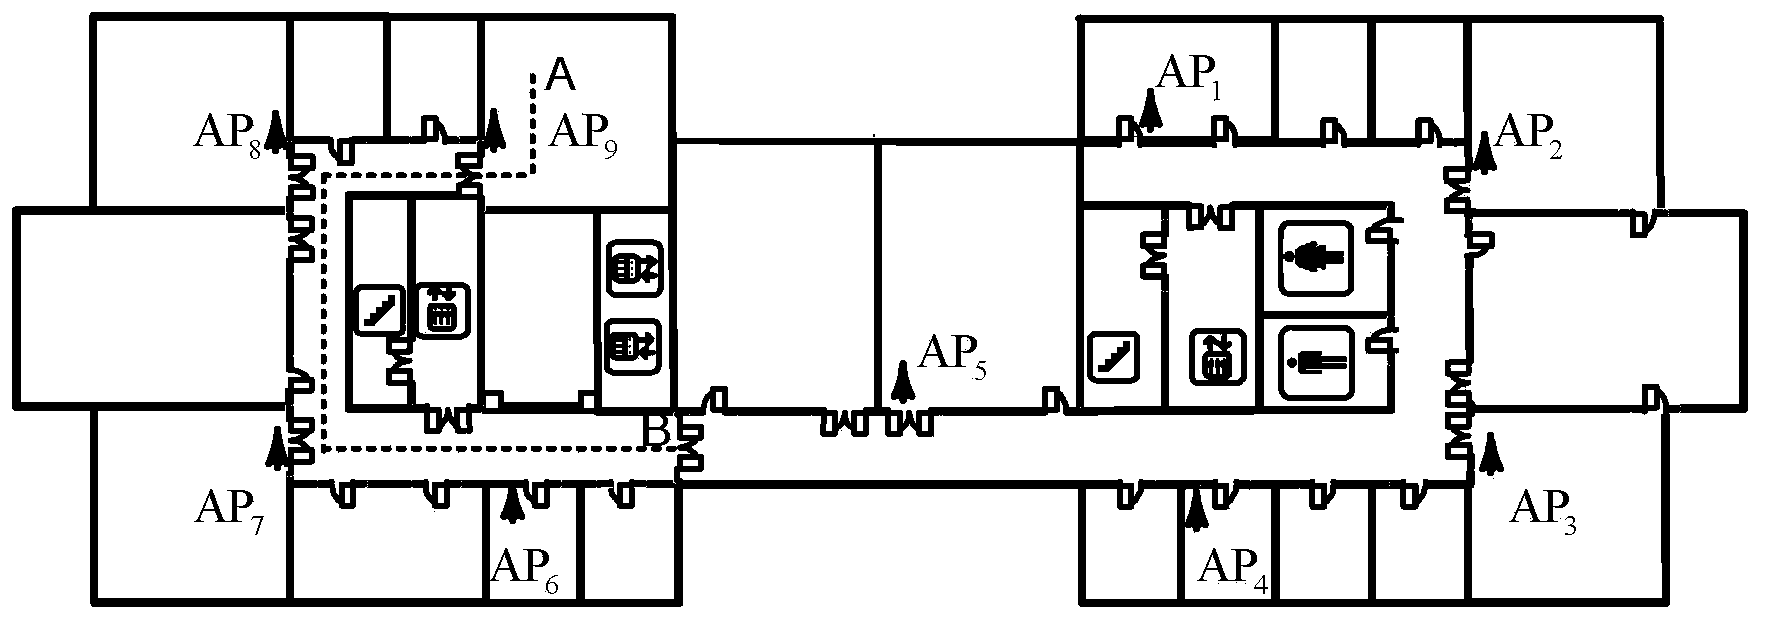 Map matching-assistant indoor positioning method